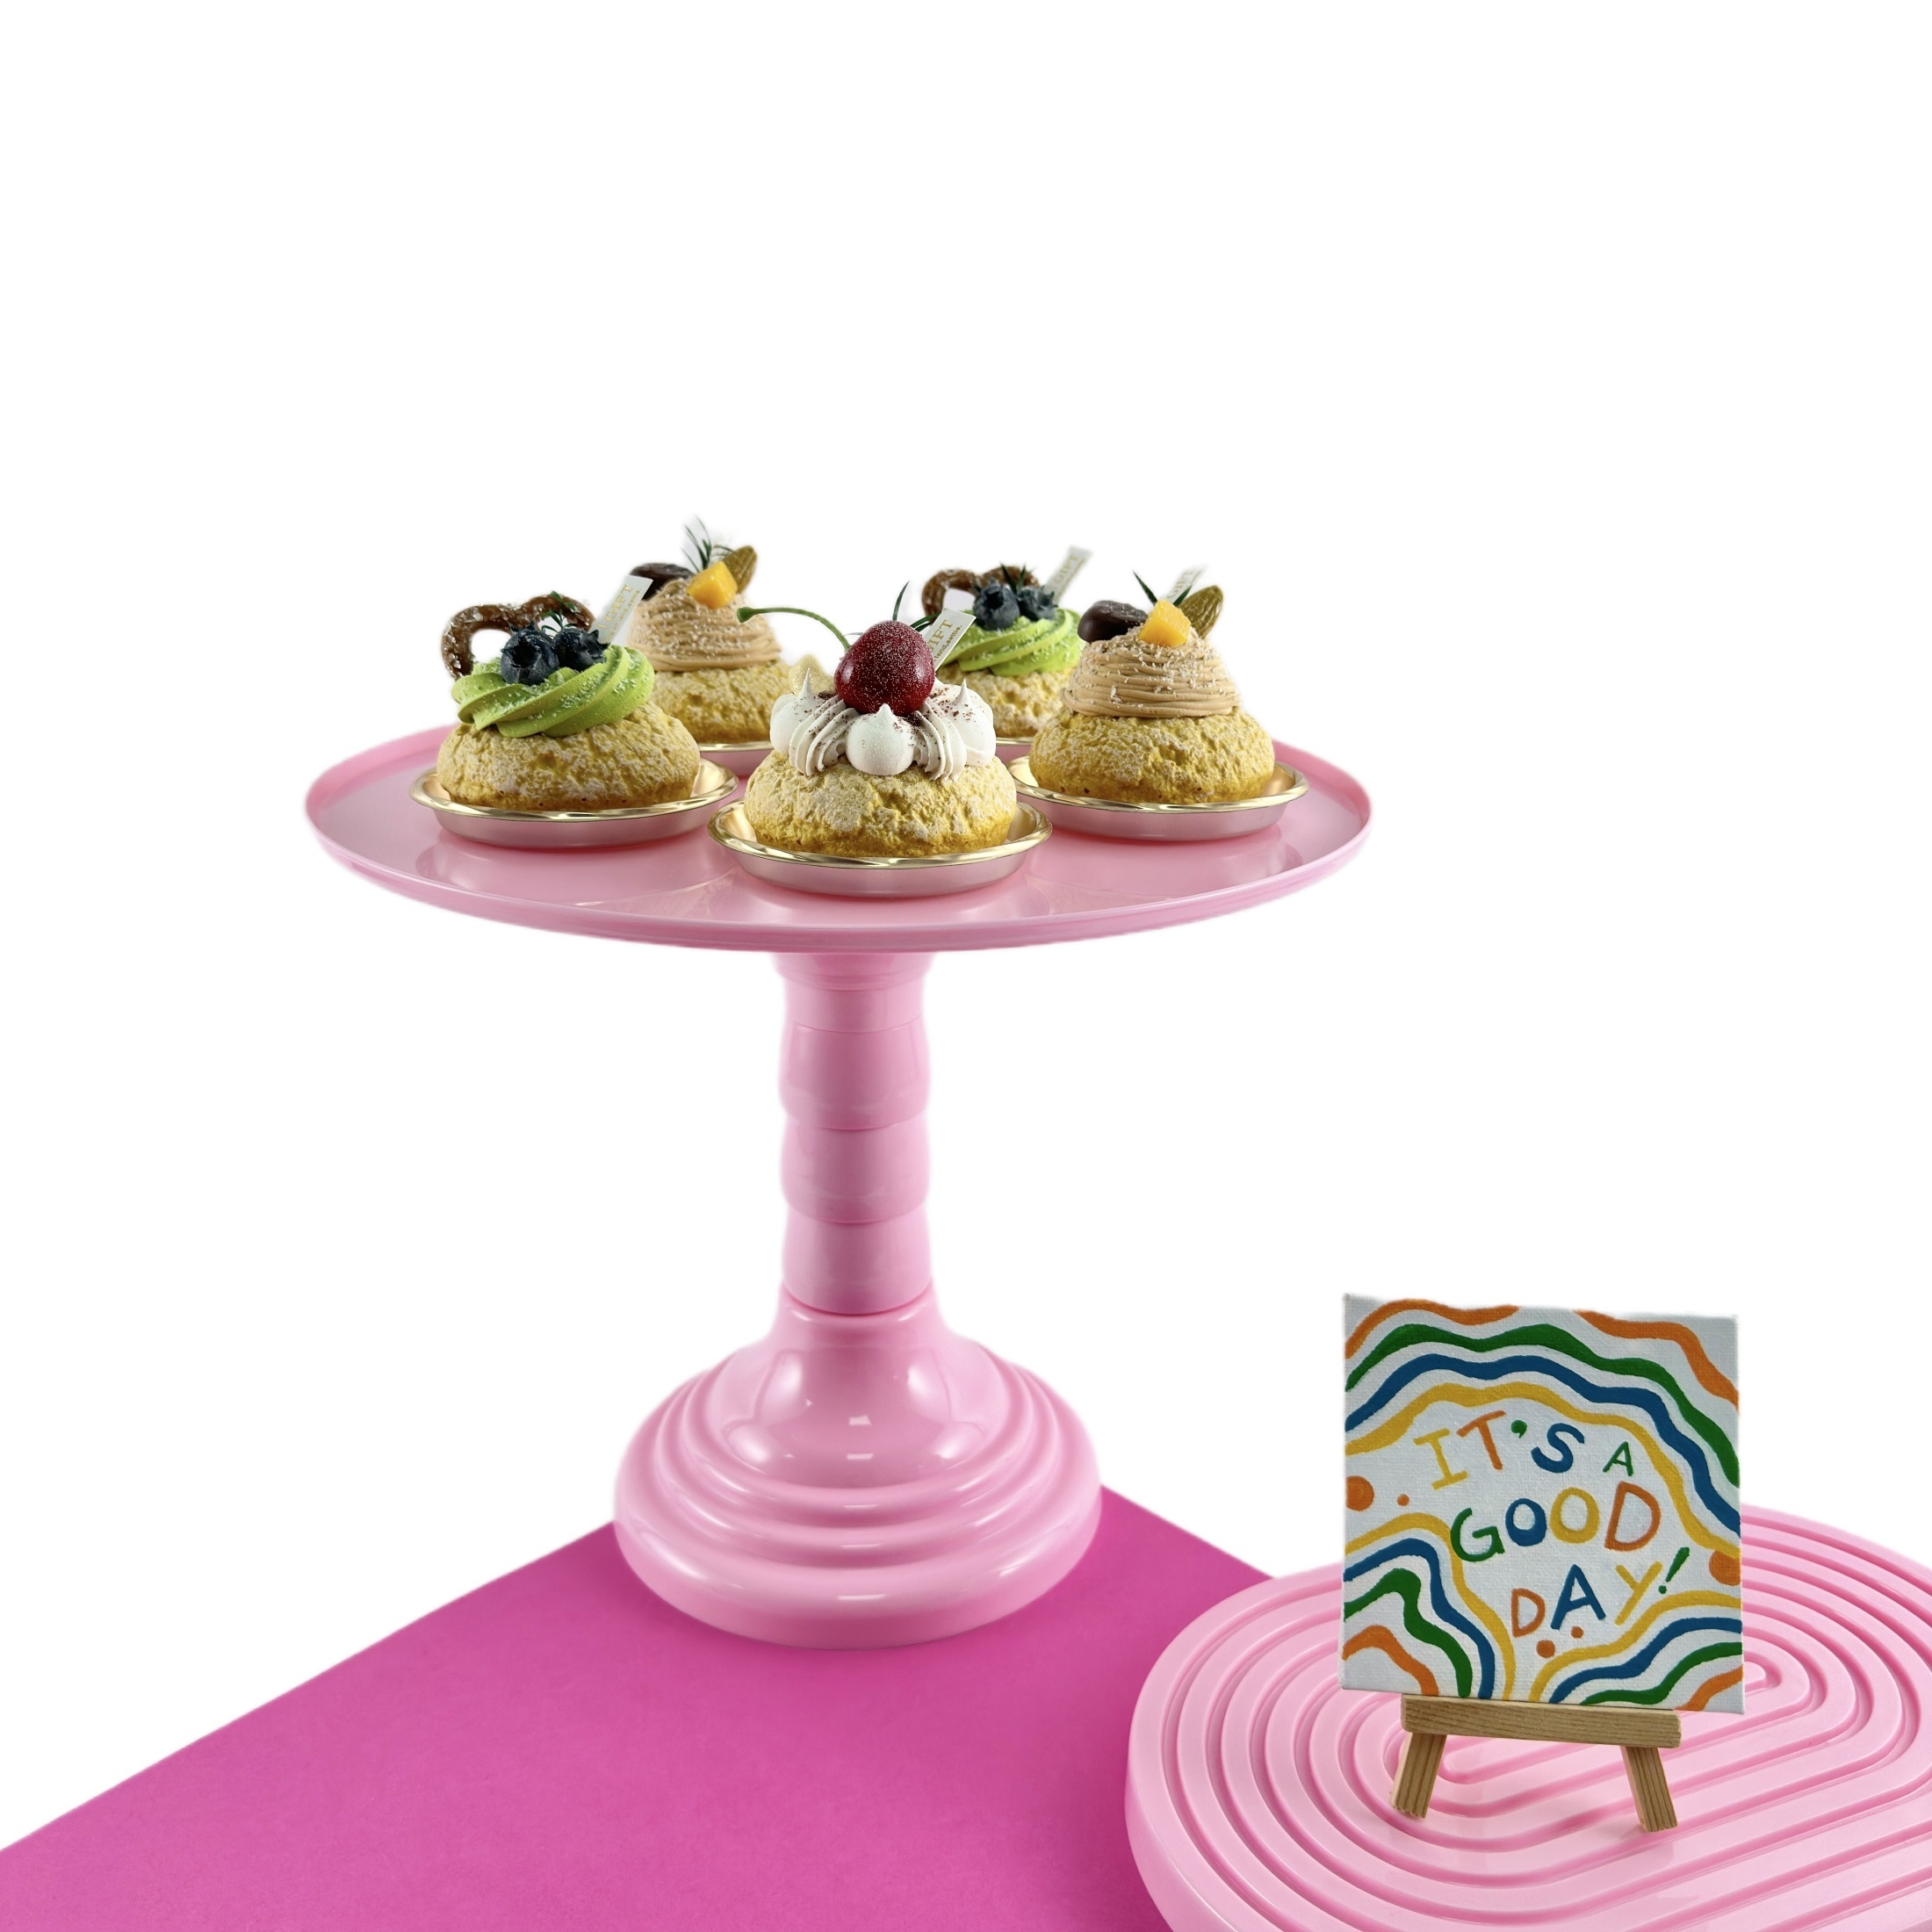 1pc durable and sturdy cupcake stand cake display dessert holder cookie pedestal stands plastic trays for desserts round gothic serving plate for birthday party mothers day easter party spring decor